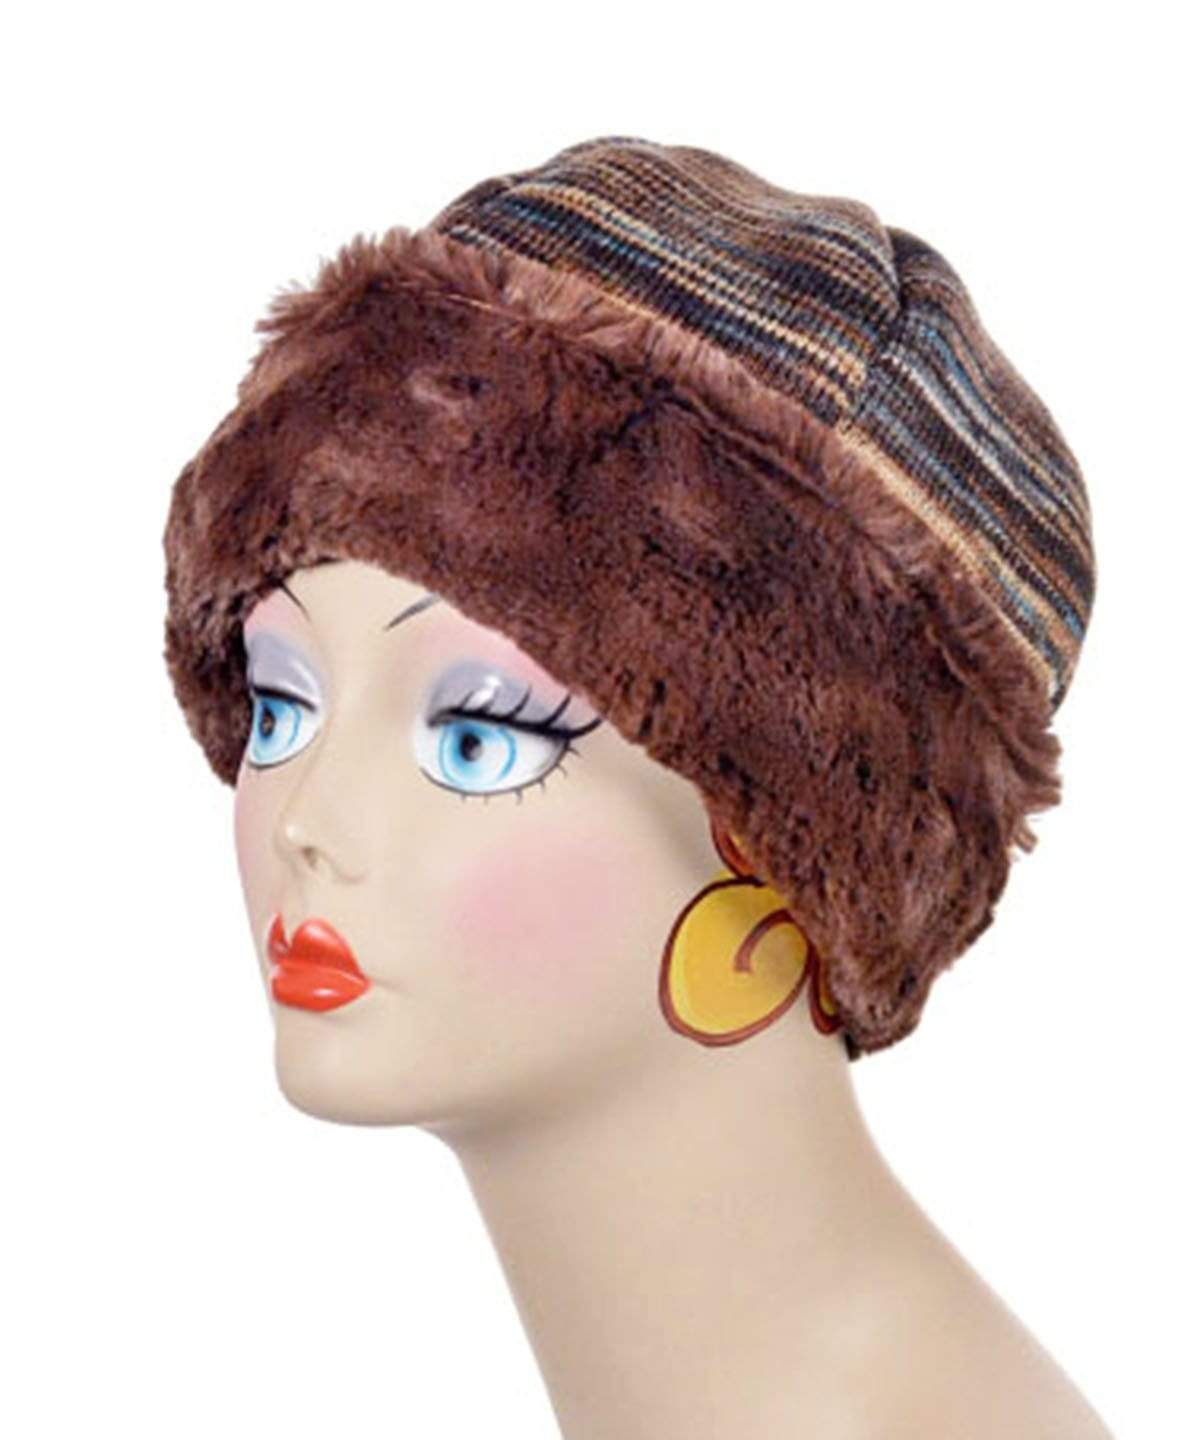 Beanie Hat, reversible – in Sweet Stripes English Toffee lined in Cuddly Chocolate Faux Fur. By Pandemonium Millinery